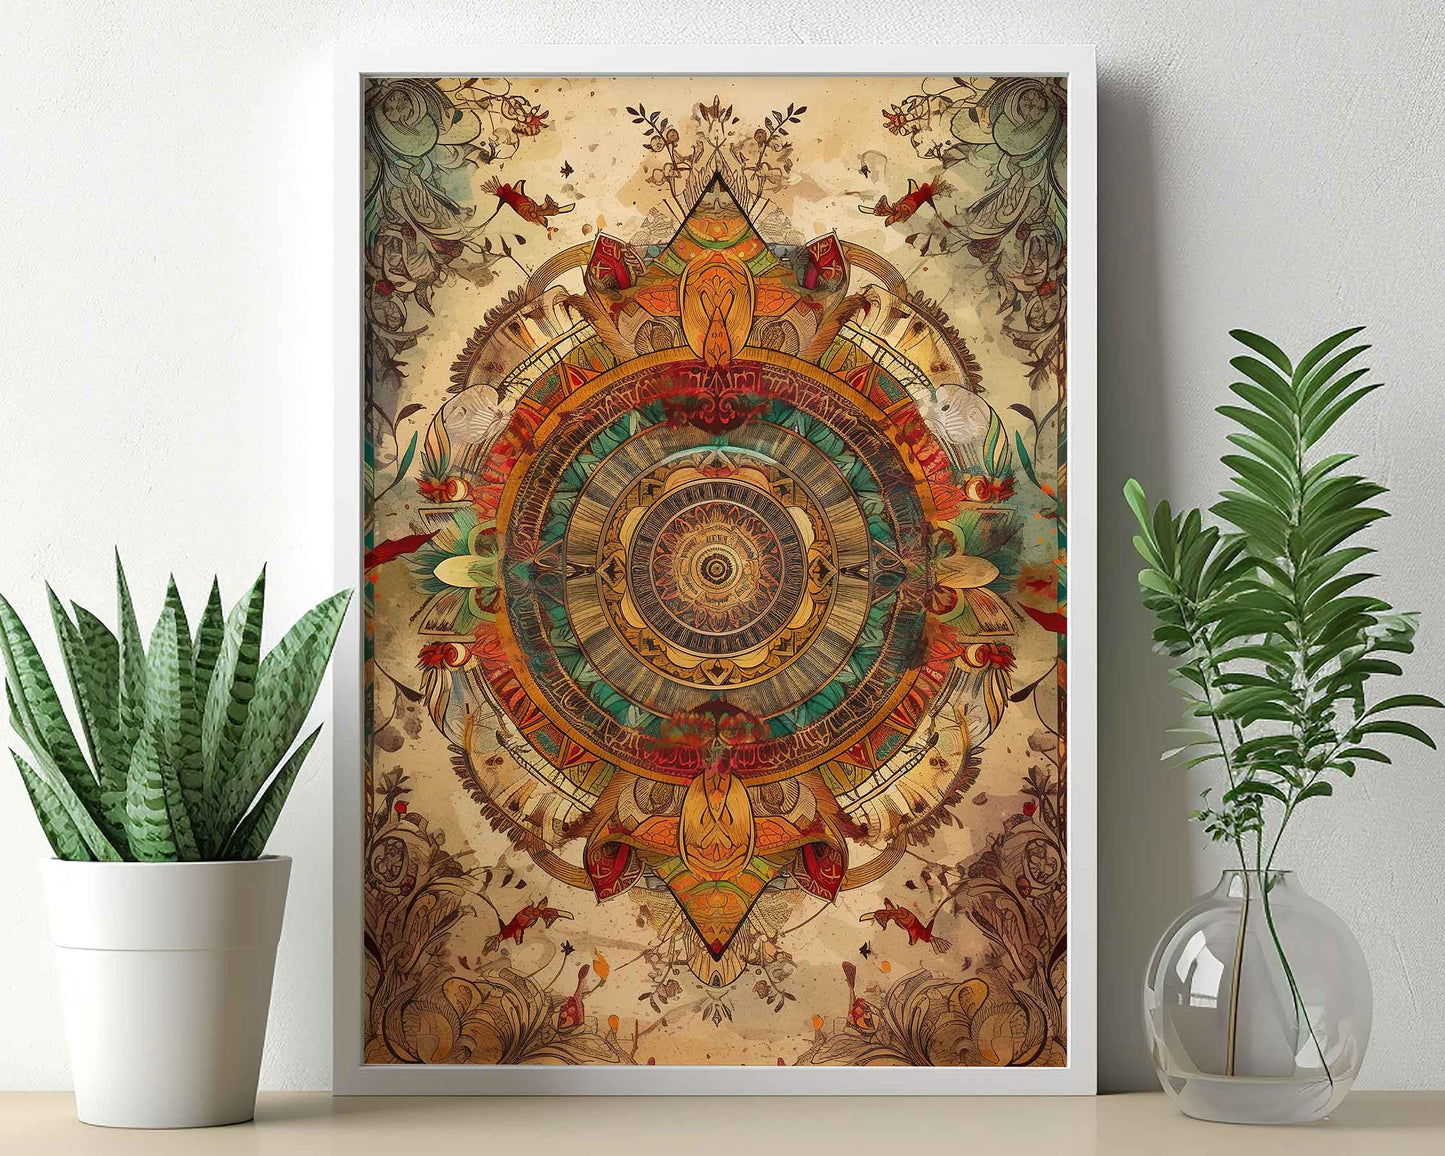 Framed Image of Earth Tone Boho Mandalas Flowers and Feathers Wall Art Poster Prints